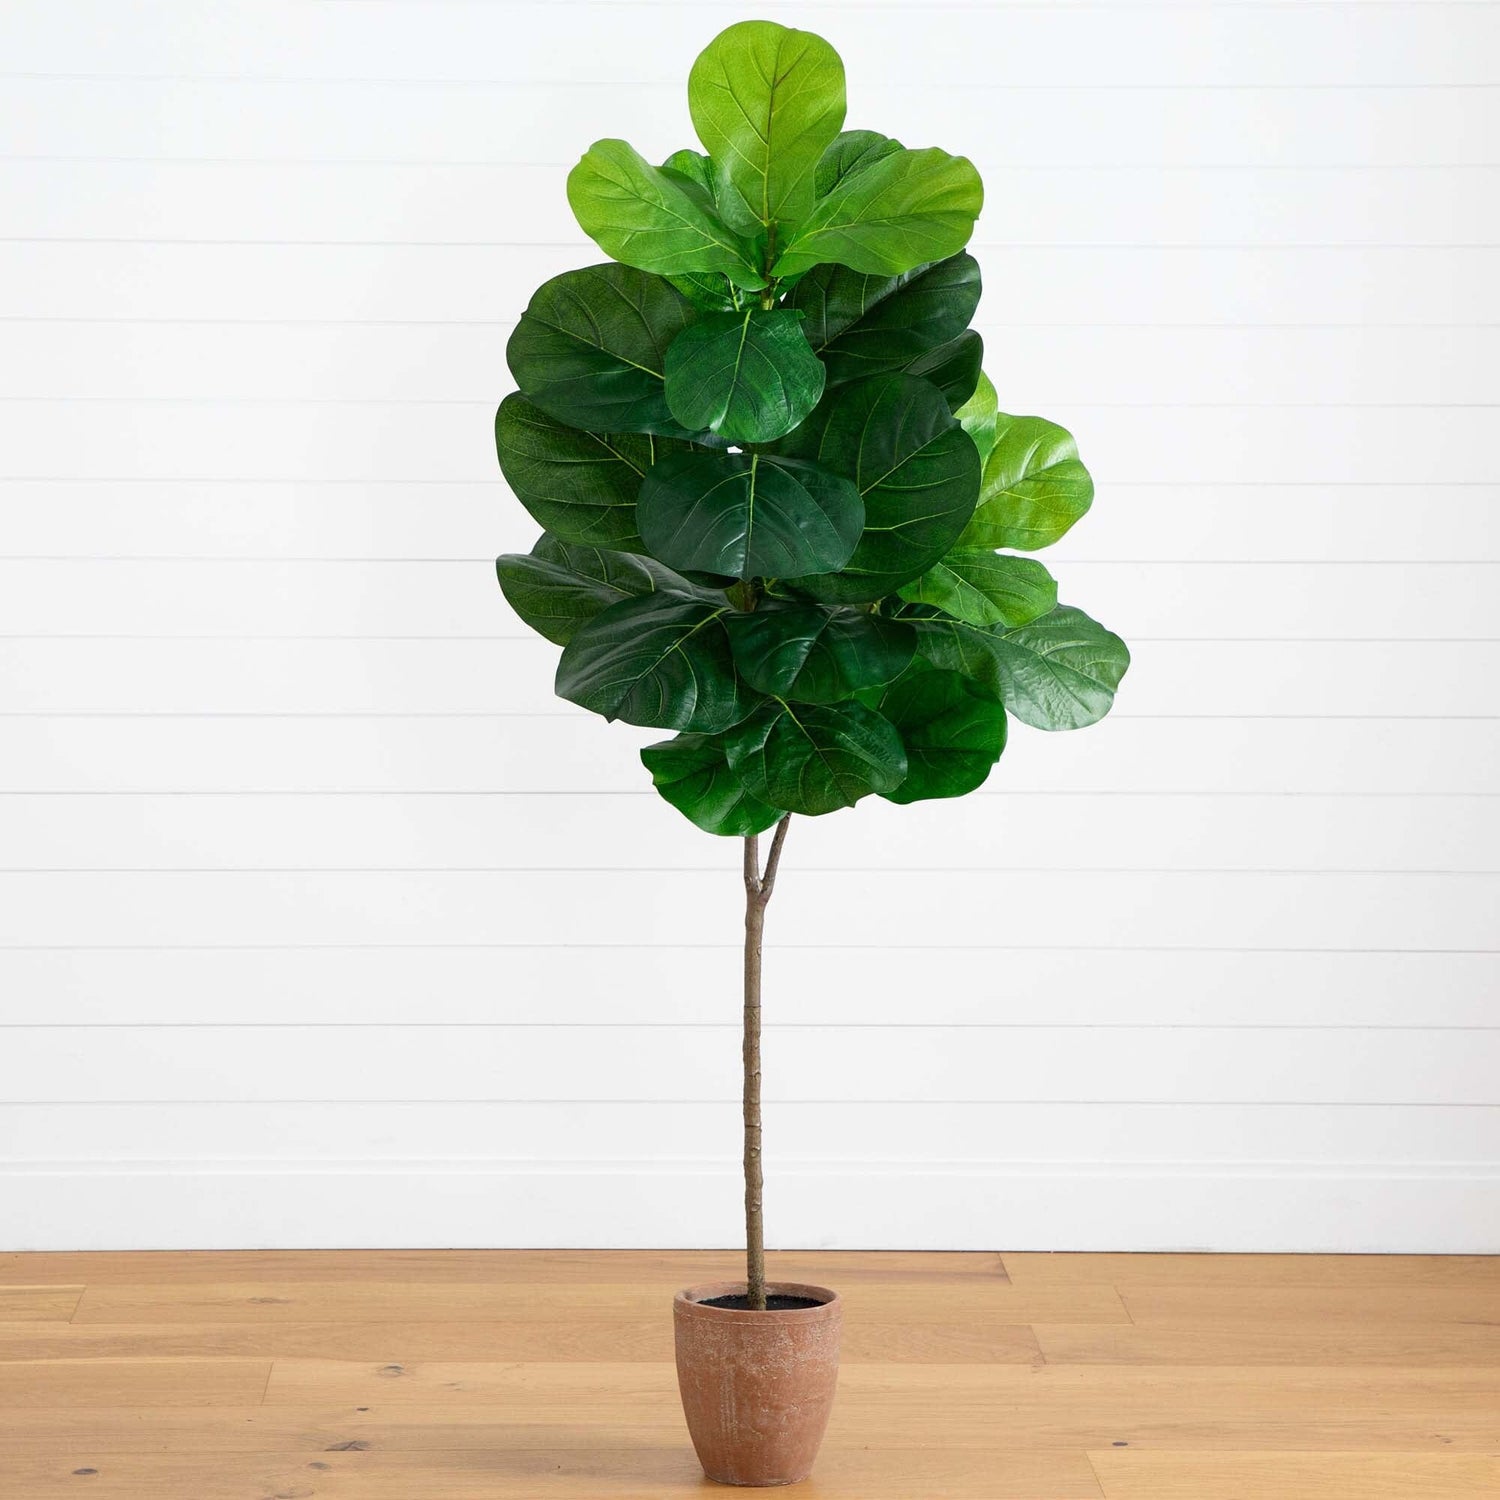 6’ Artificial Giant Leaf Fiddle Leaf Fig Tree in Decorative Planter with Real Touch Leaves